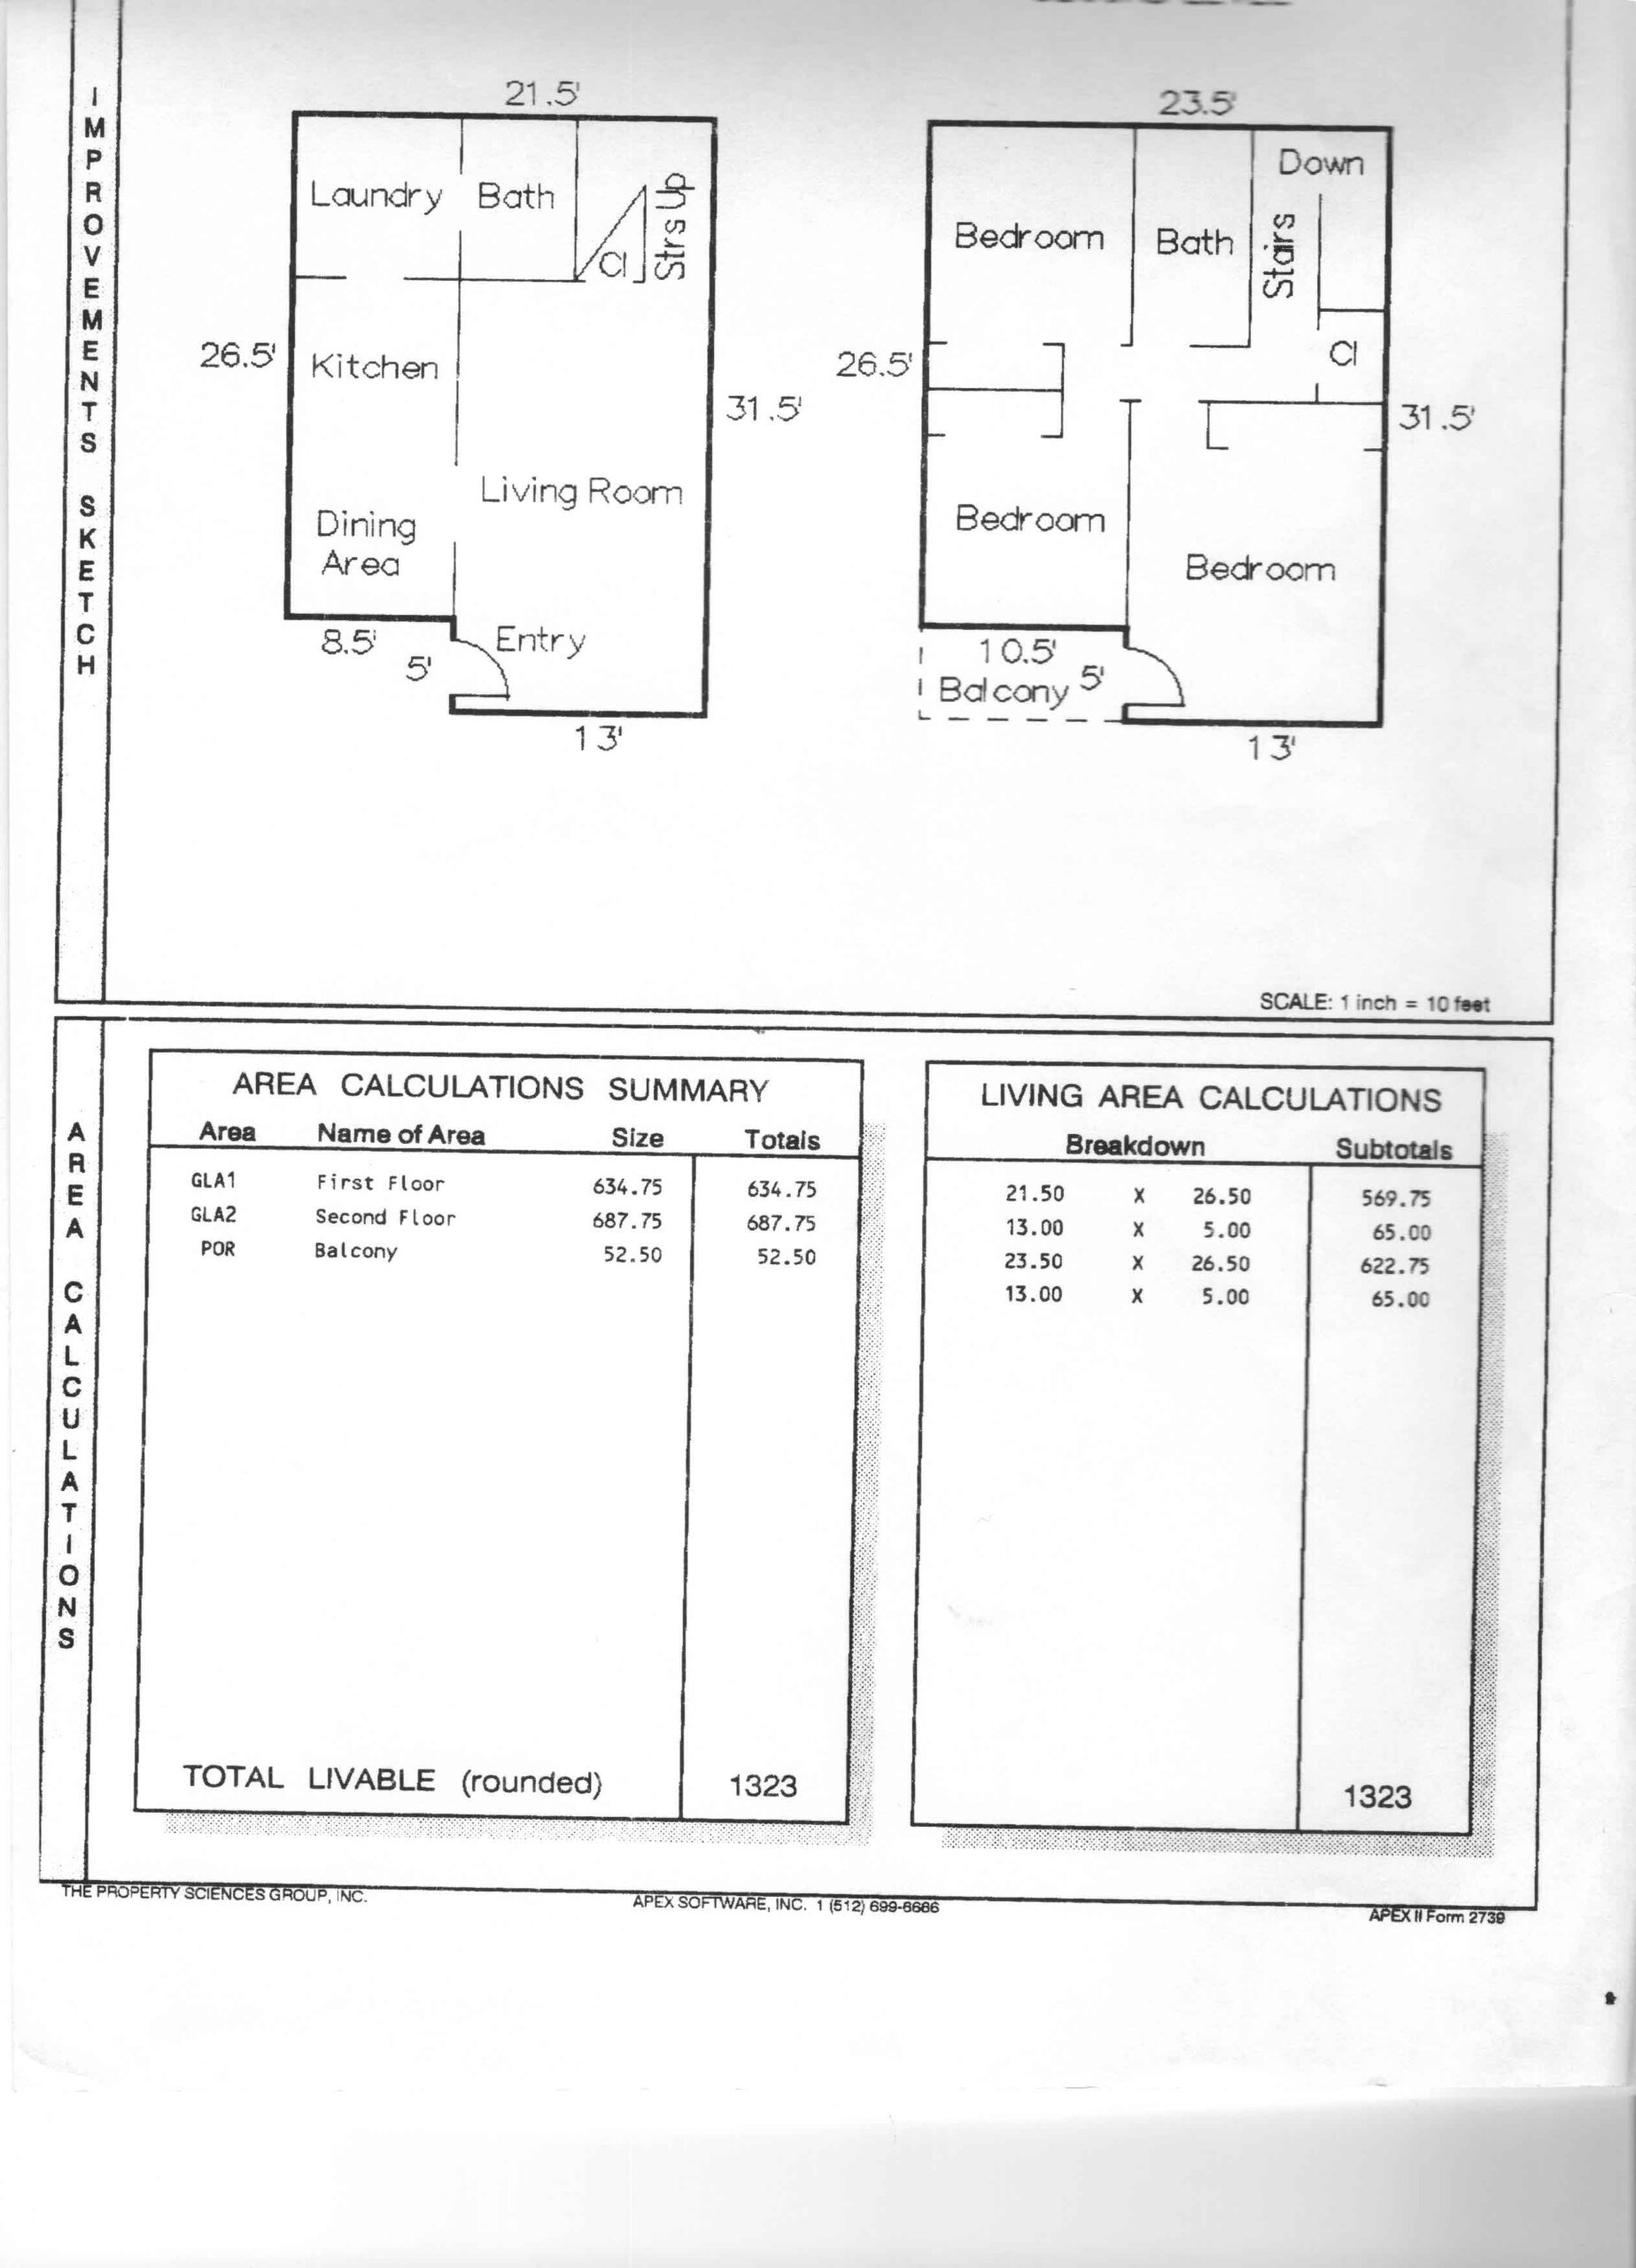 A page of measurements and calculations for a house.